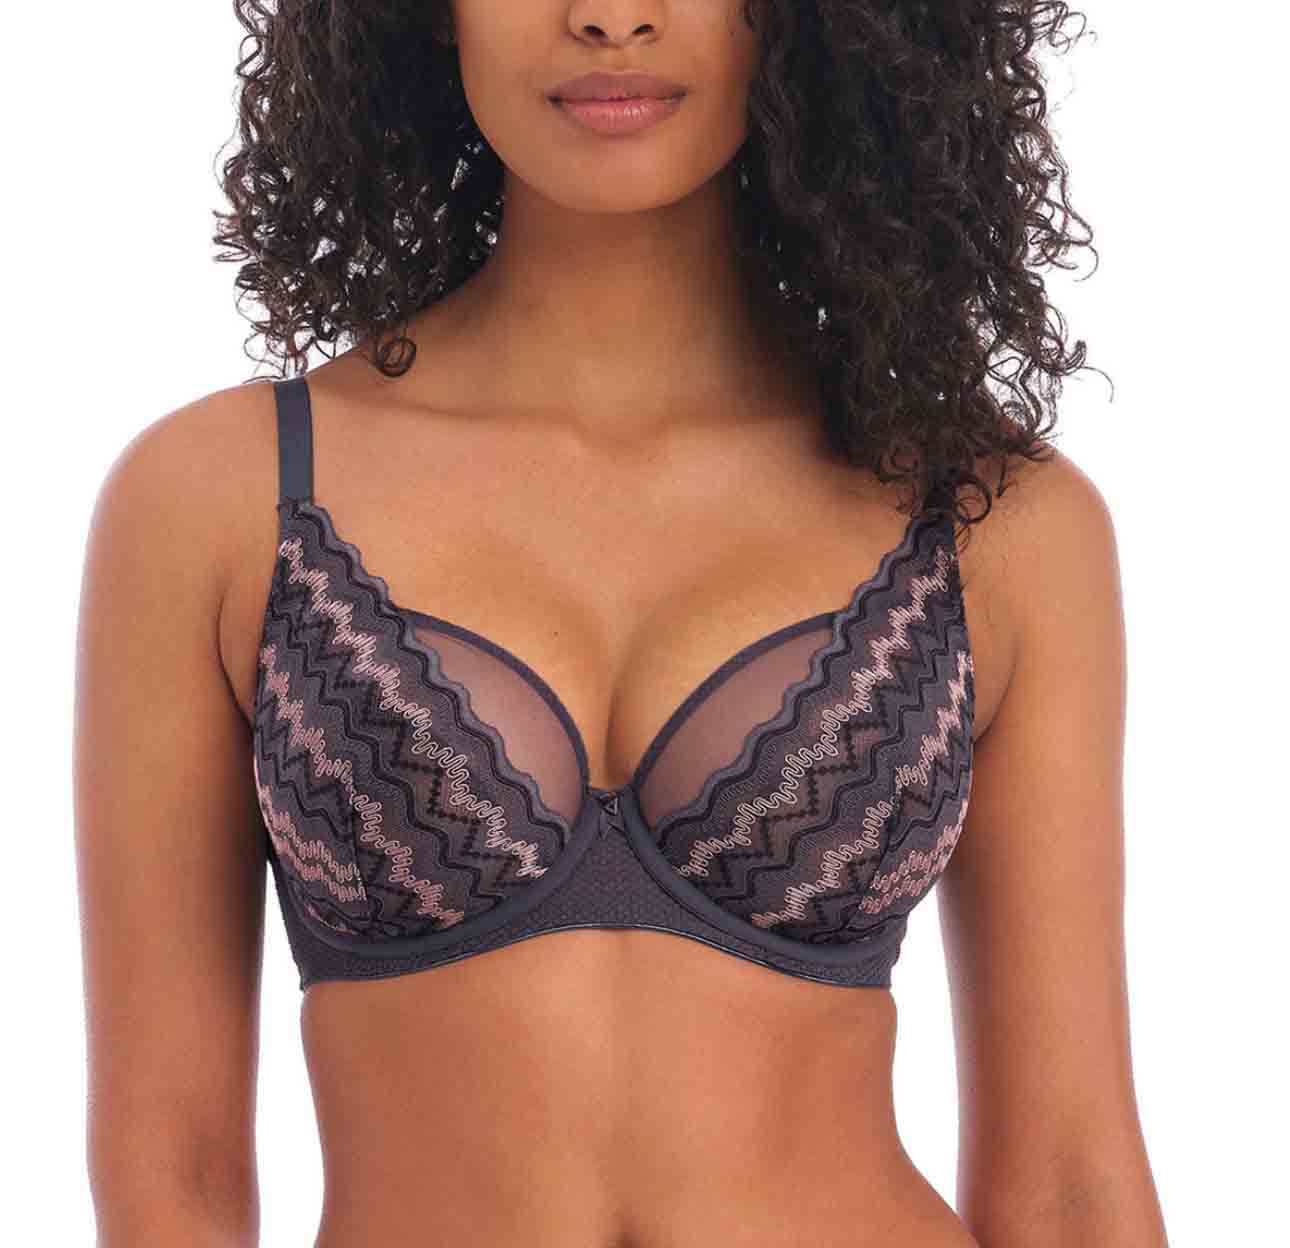 Freya Deco Vibe Underwire Molded Plunge Bra in Black - Busted Bra Shop